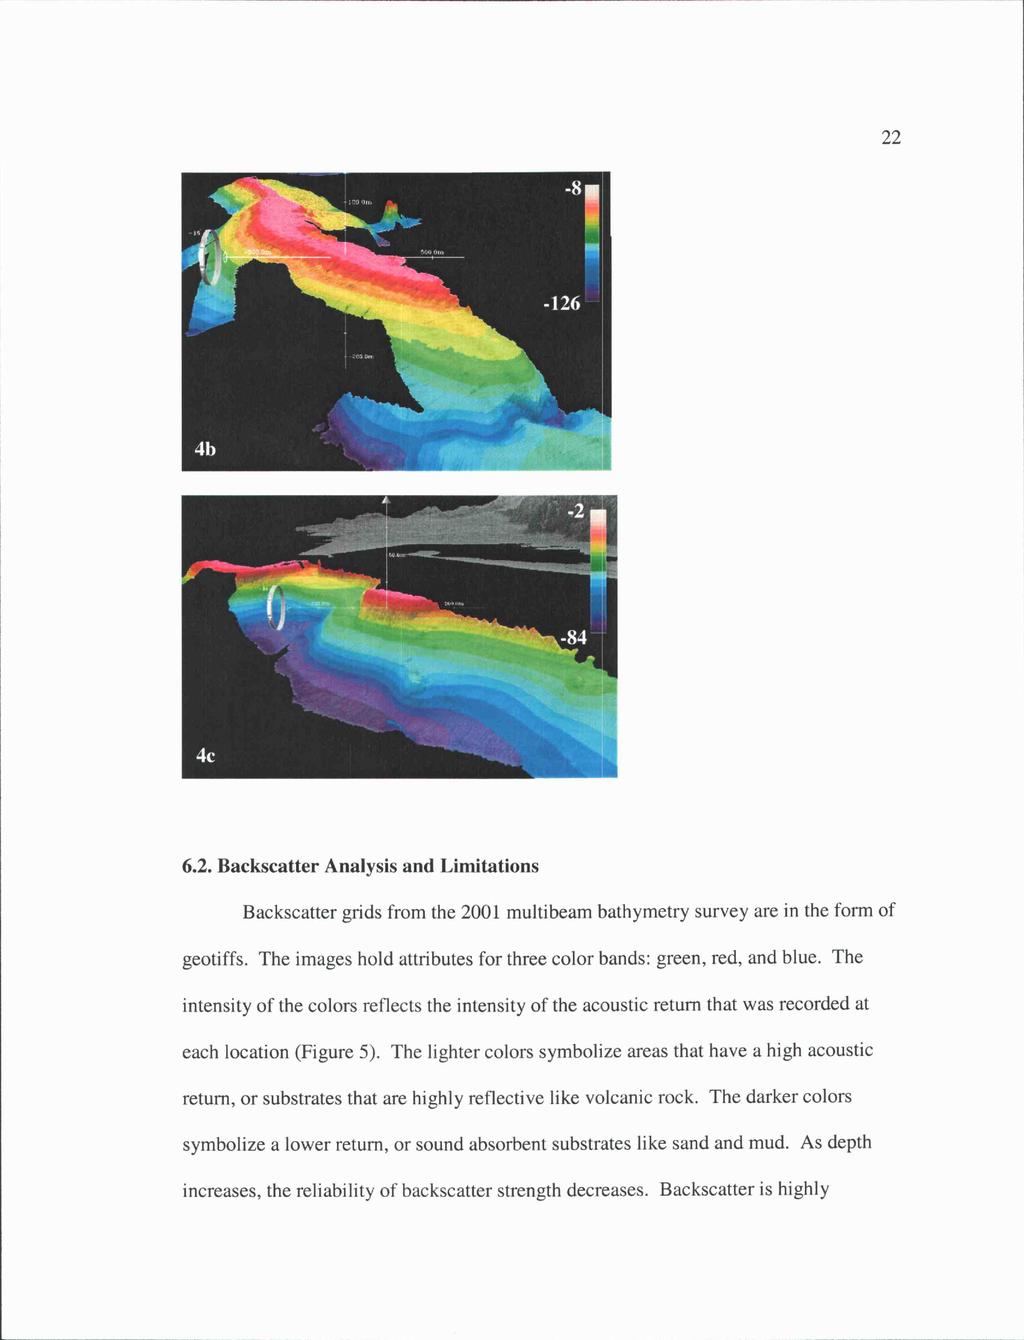 -, 6.2. Backscatter Analysis and Limitations Backscatter grids from the 2001 multibeam bathymetry survey are in the form of geotiffs.